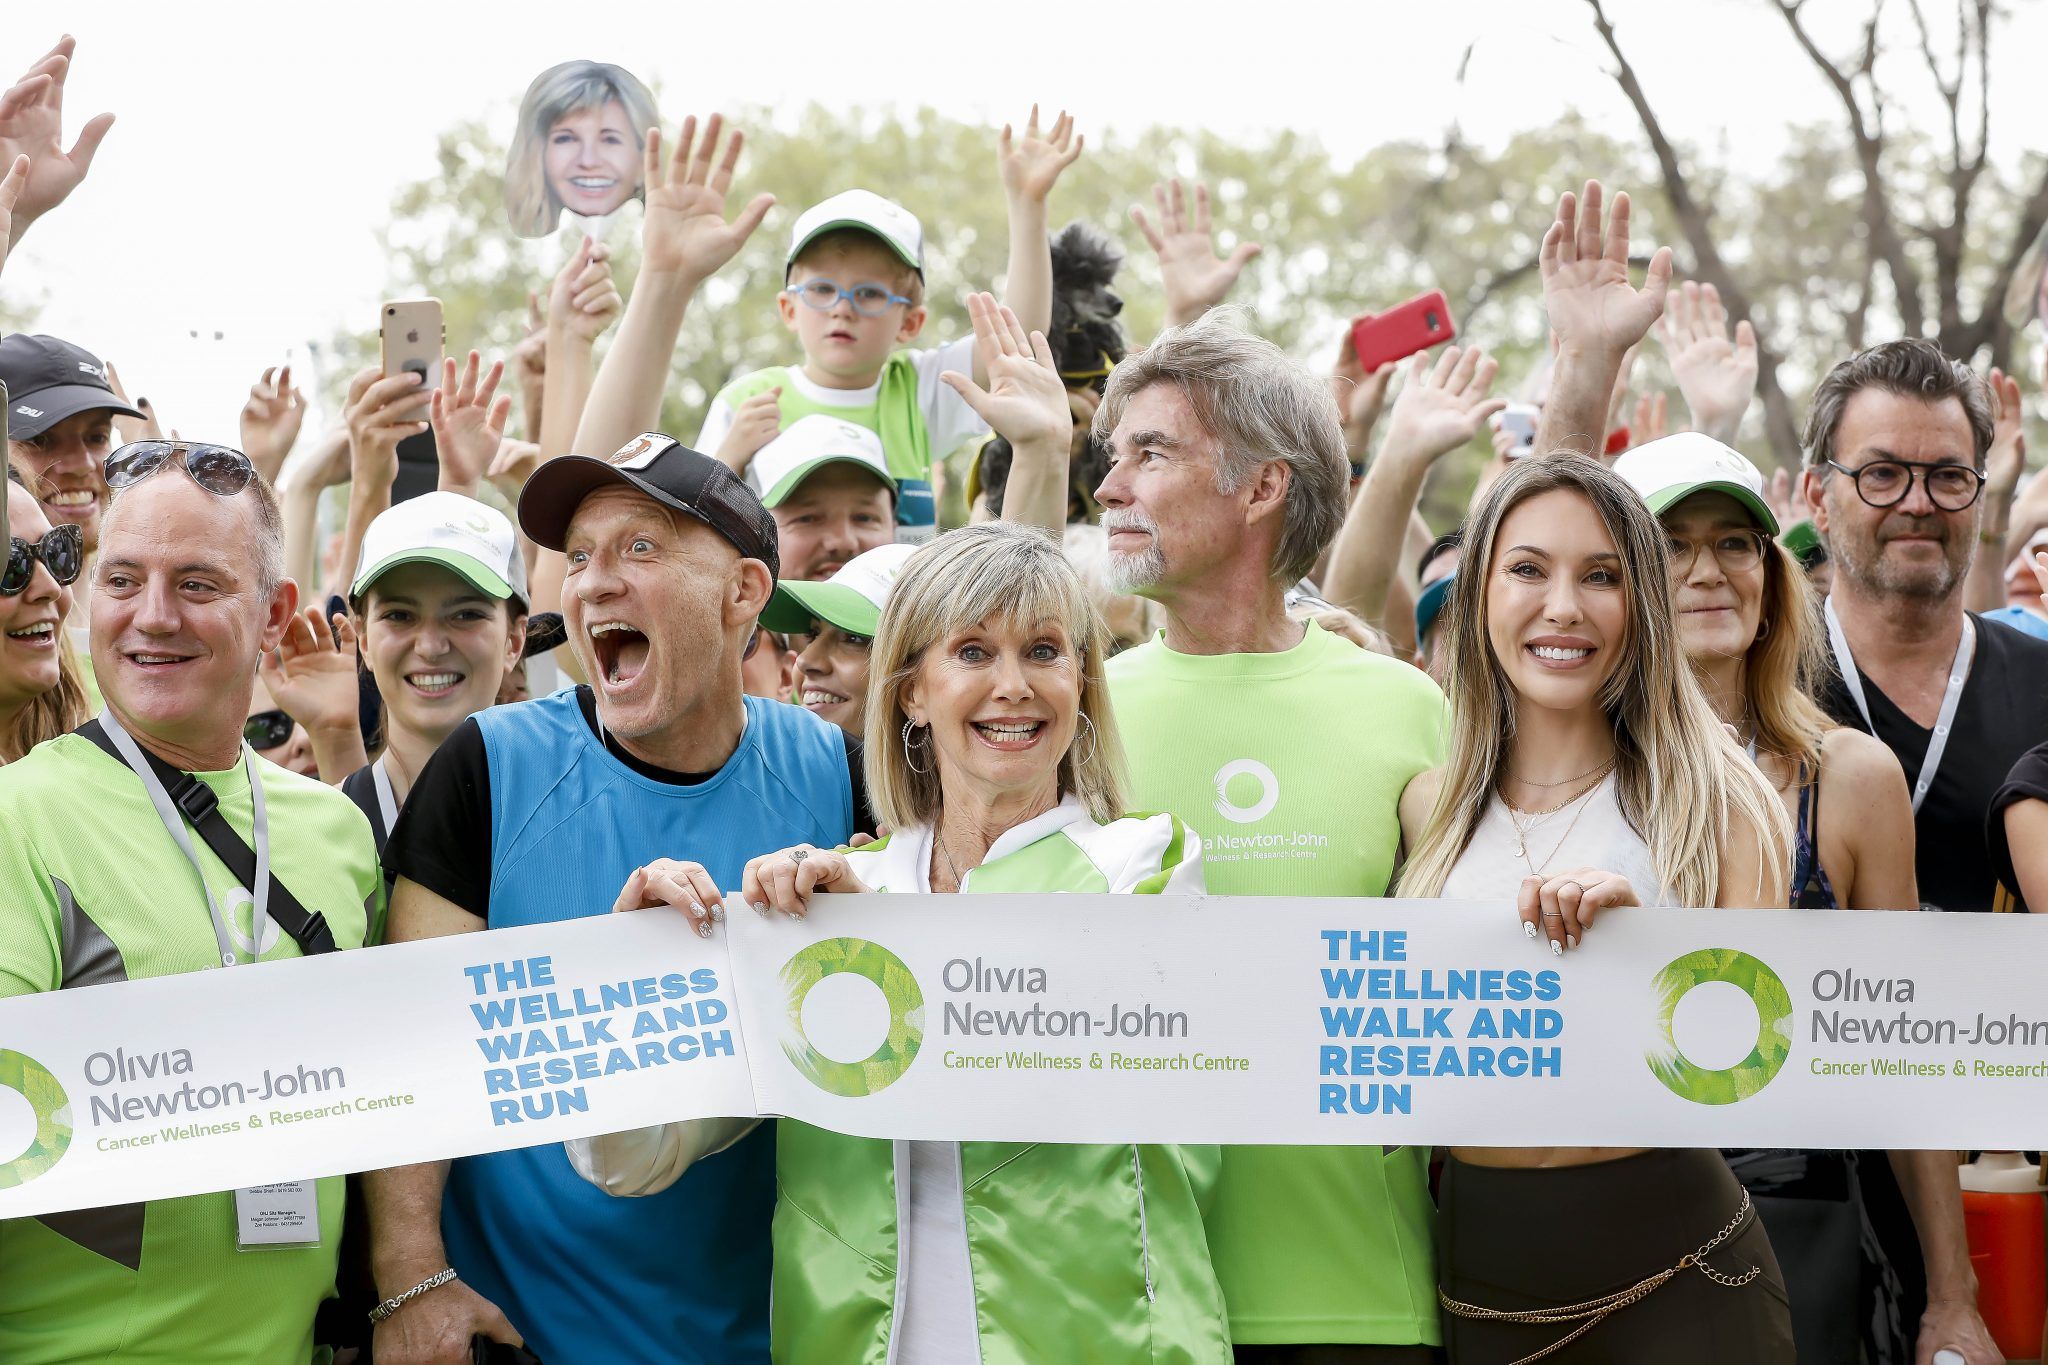 MELBOURNE, AUSTRALIA - OCTOBER 06:Olivia Newton john attends the Olivia Newton-John Wellness Walk and Research Run on October 06, 2019 in Melbourne, Australia. The event helps fund cancer research and provide access to world-leading wellness and support care programs for patients within the ONJ Centre. (Photo by Sam Tabone/WireImage)